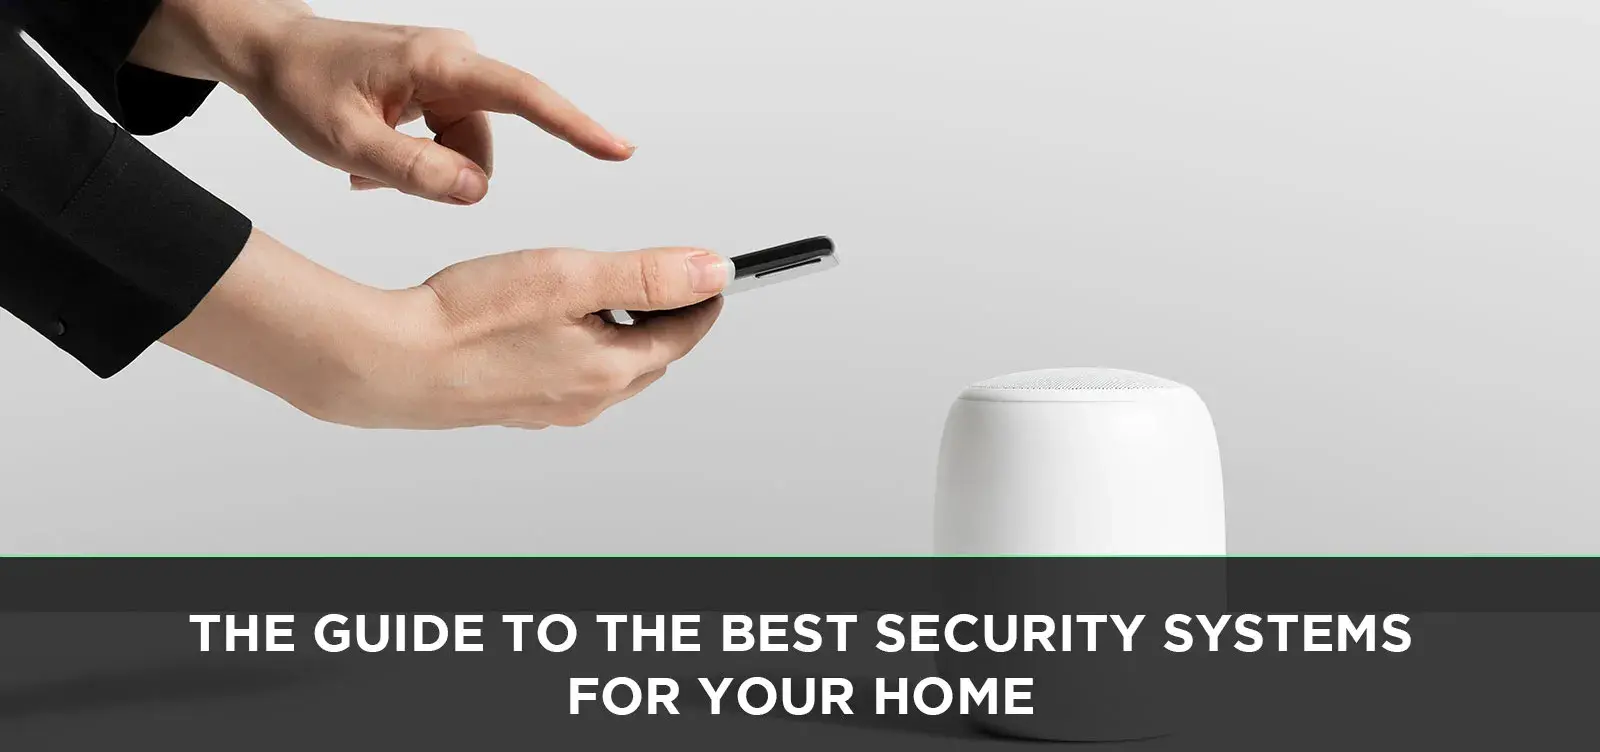 The Guide to the Best Security Systems for Your Home